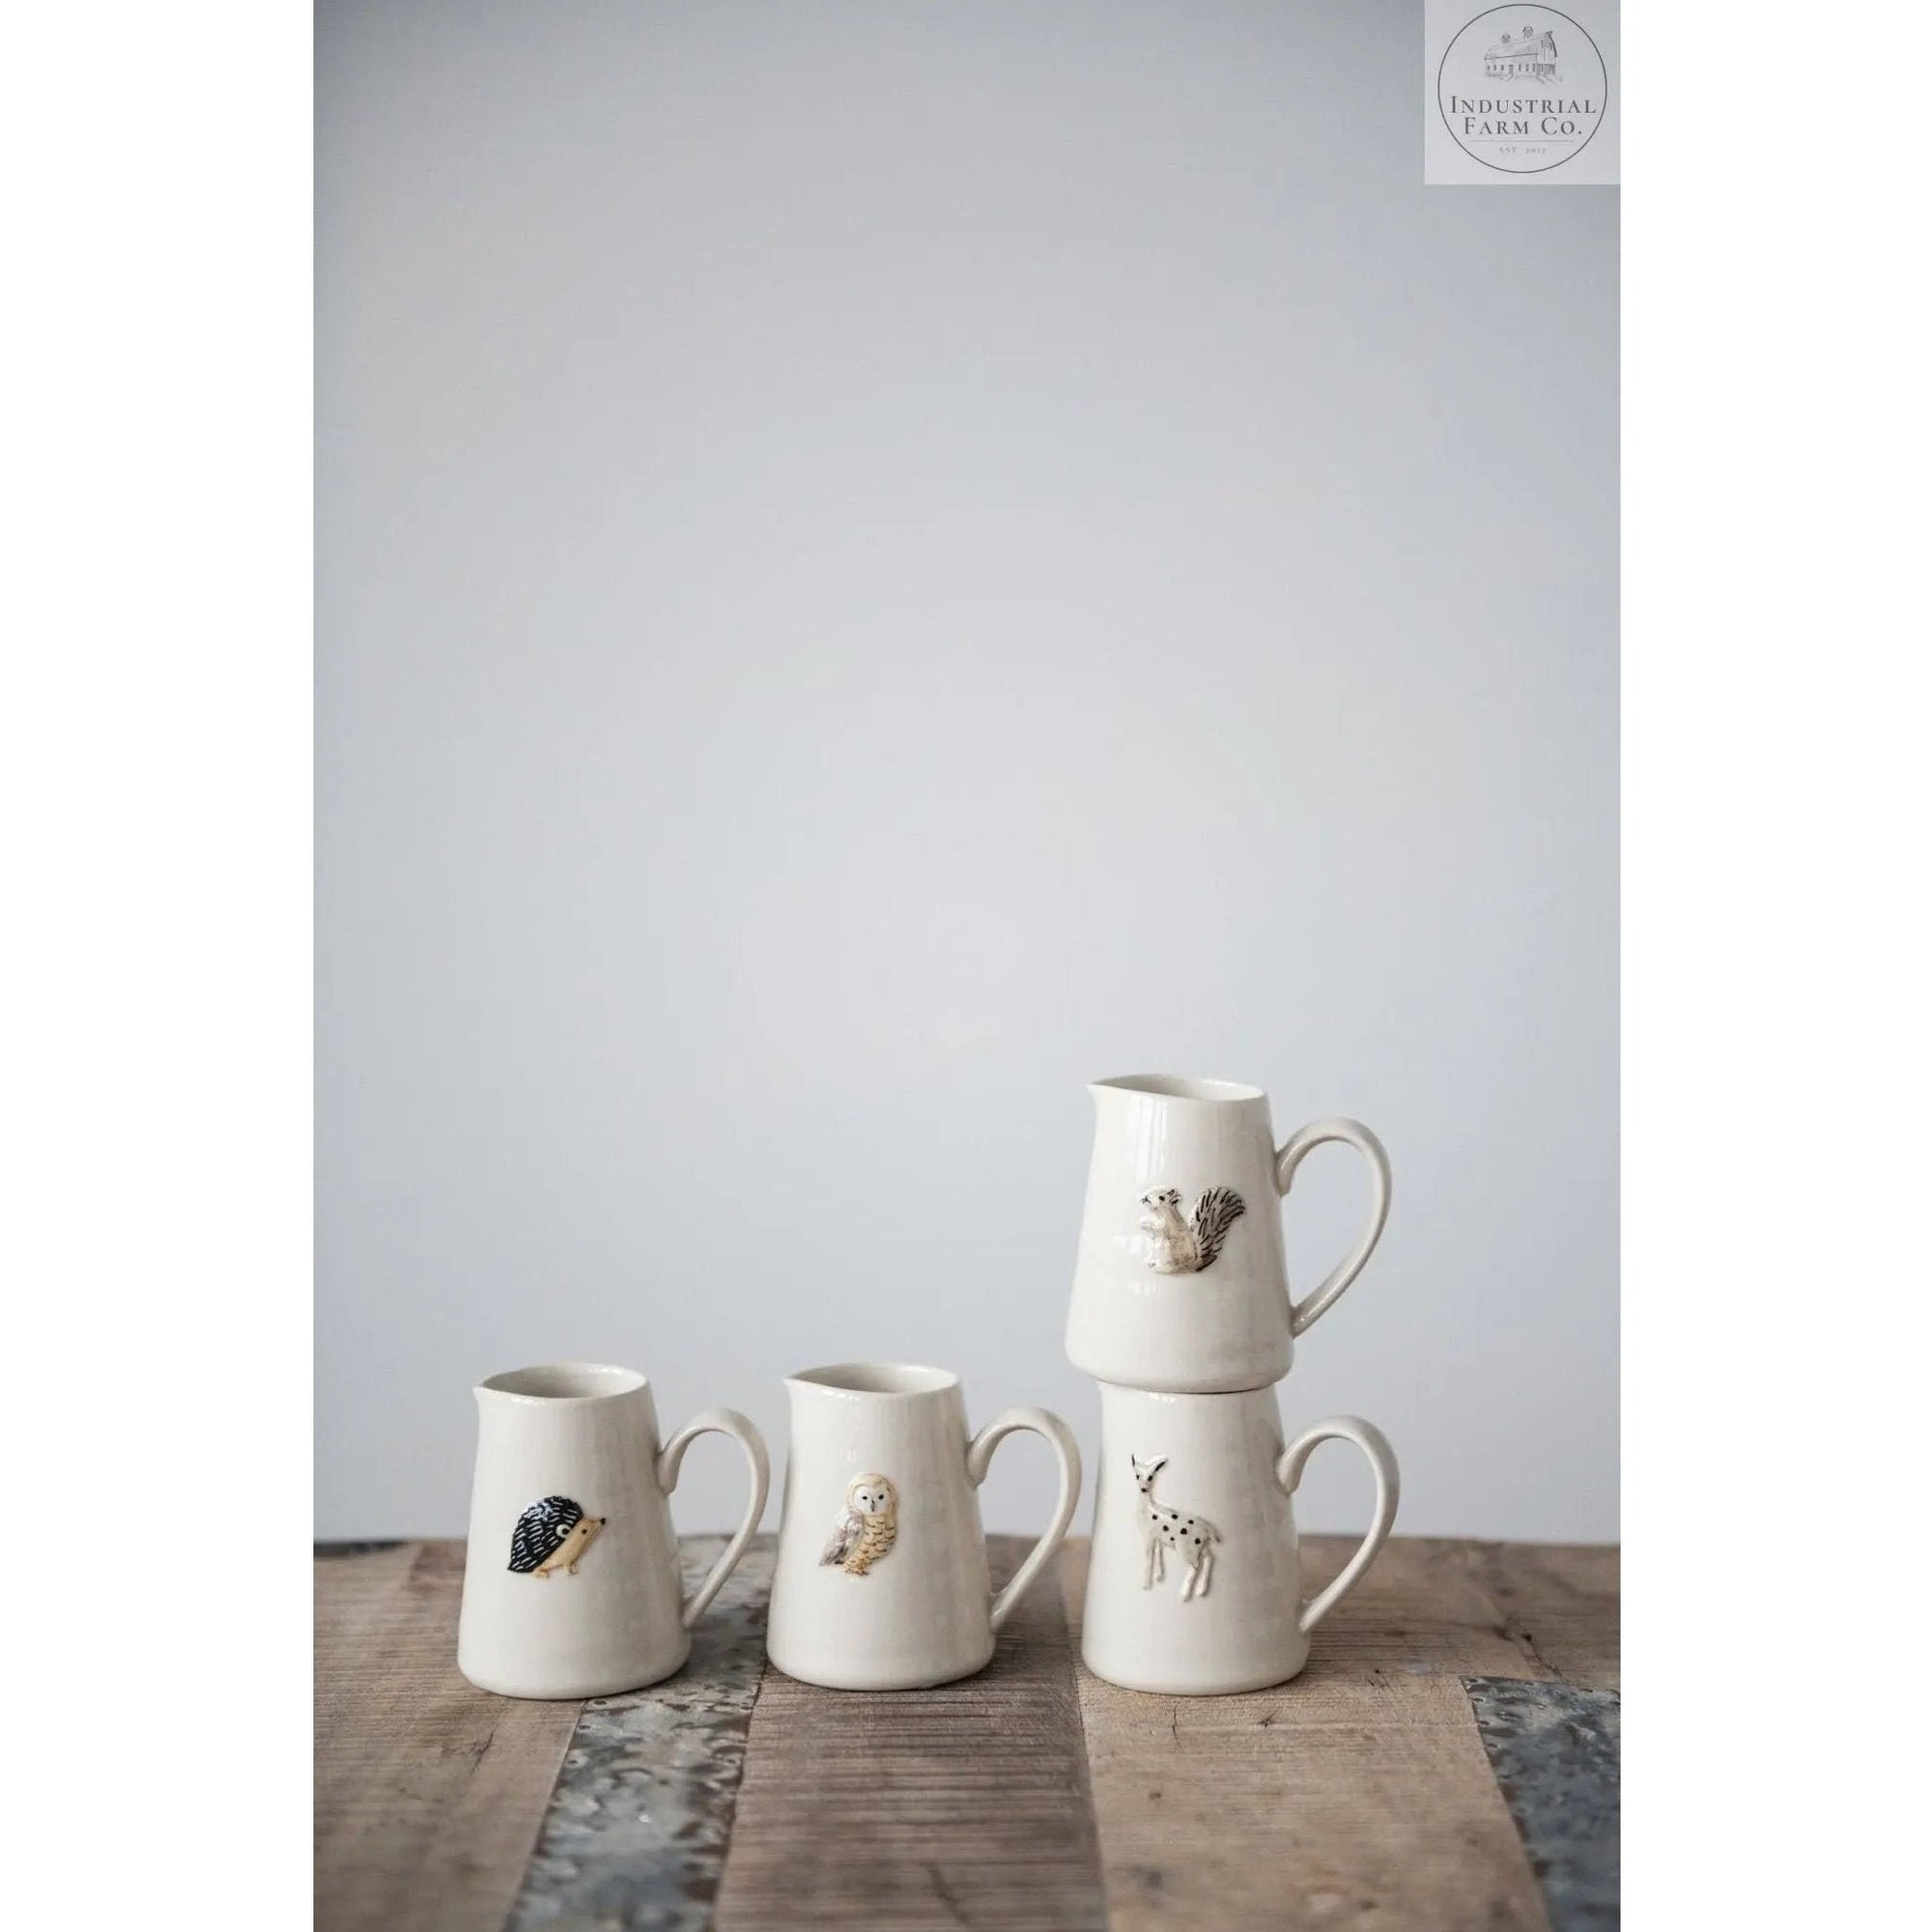 In The Woods Mini Pitchers  Squirrel   | Industrial Farm Co